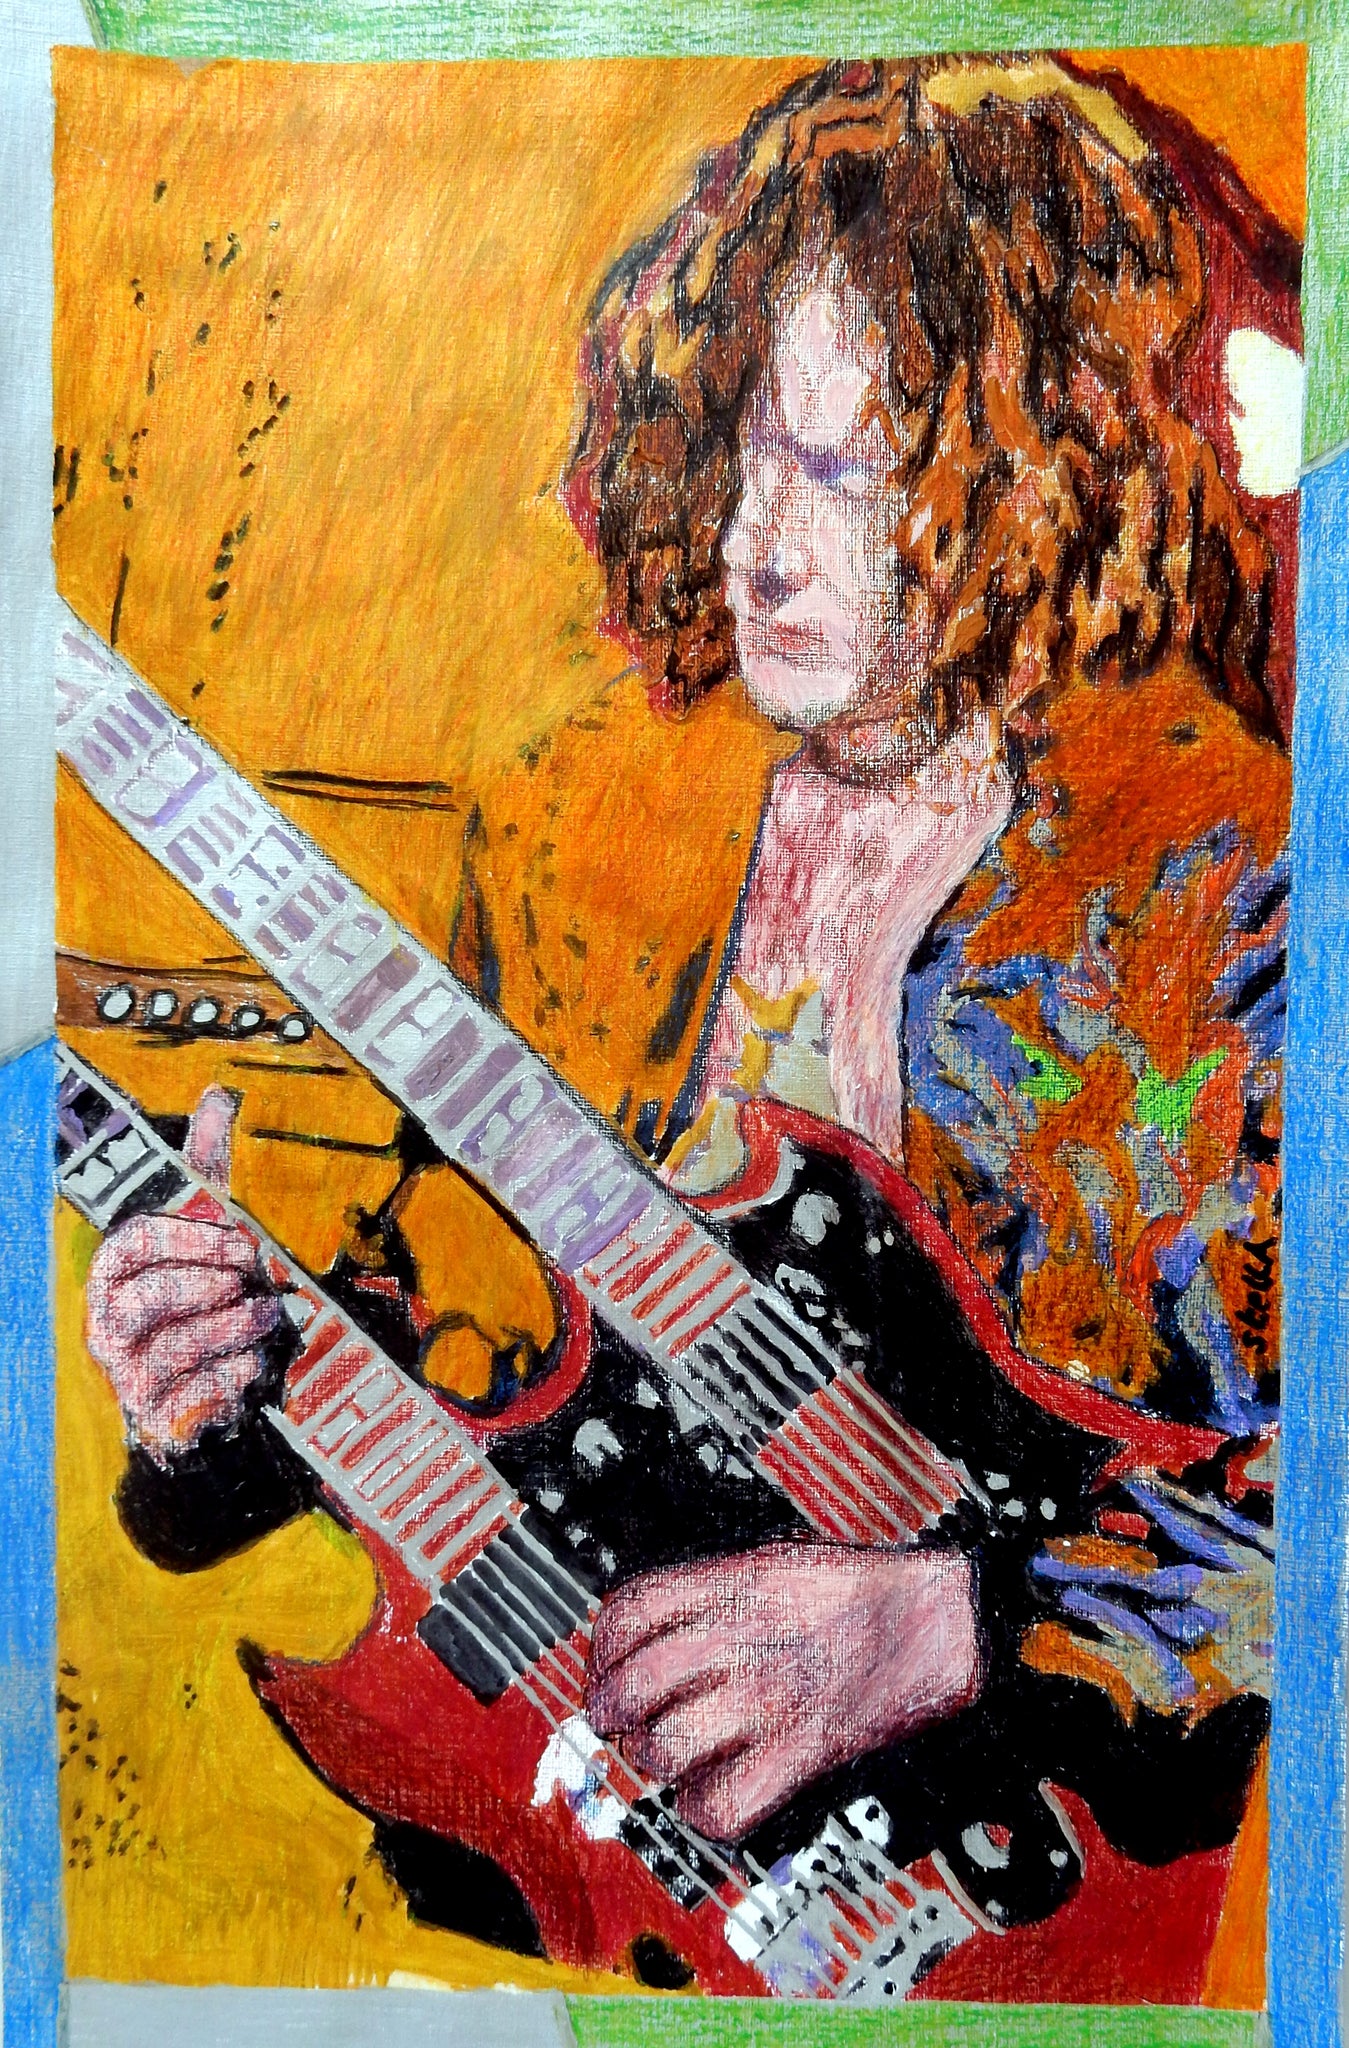 Boot Led Zeppelin mixed media on paper by Stella Tooth artist